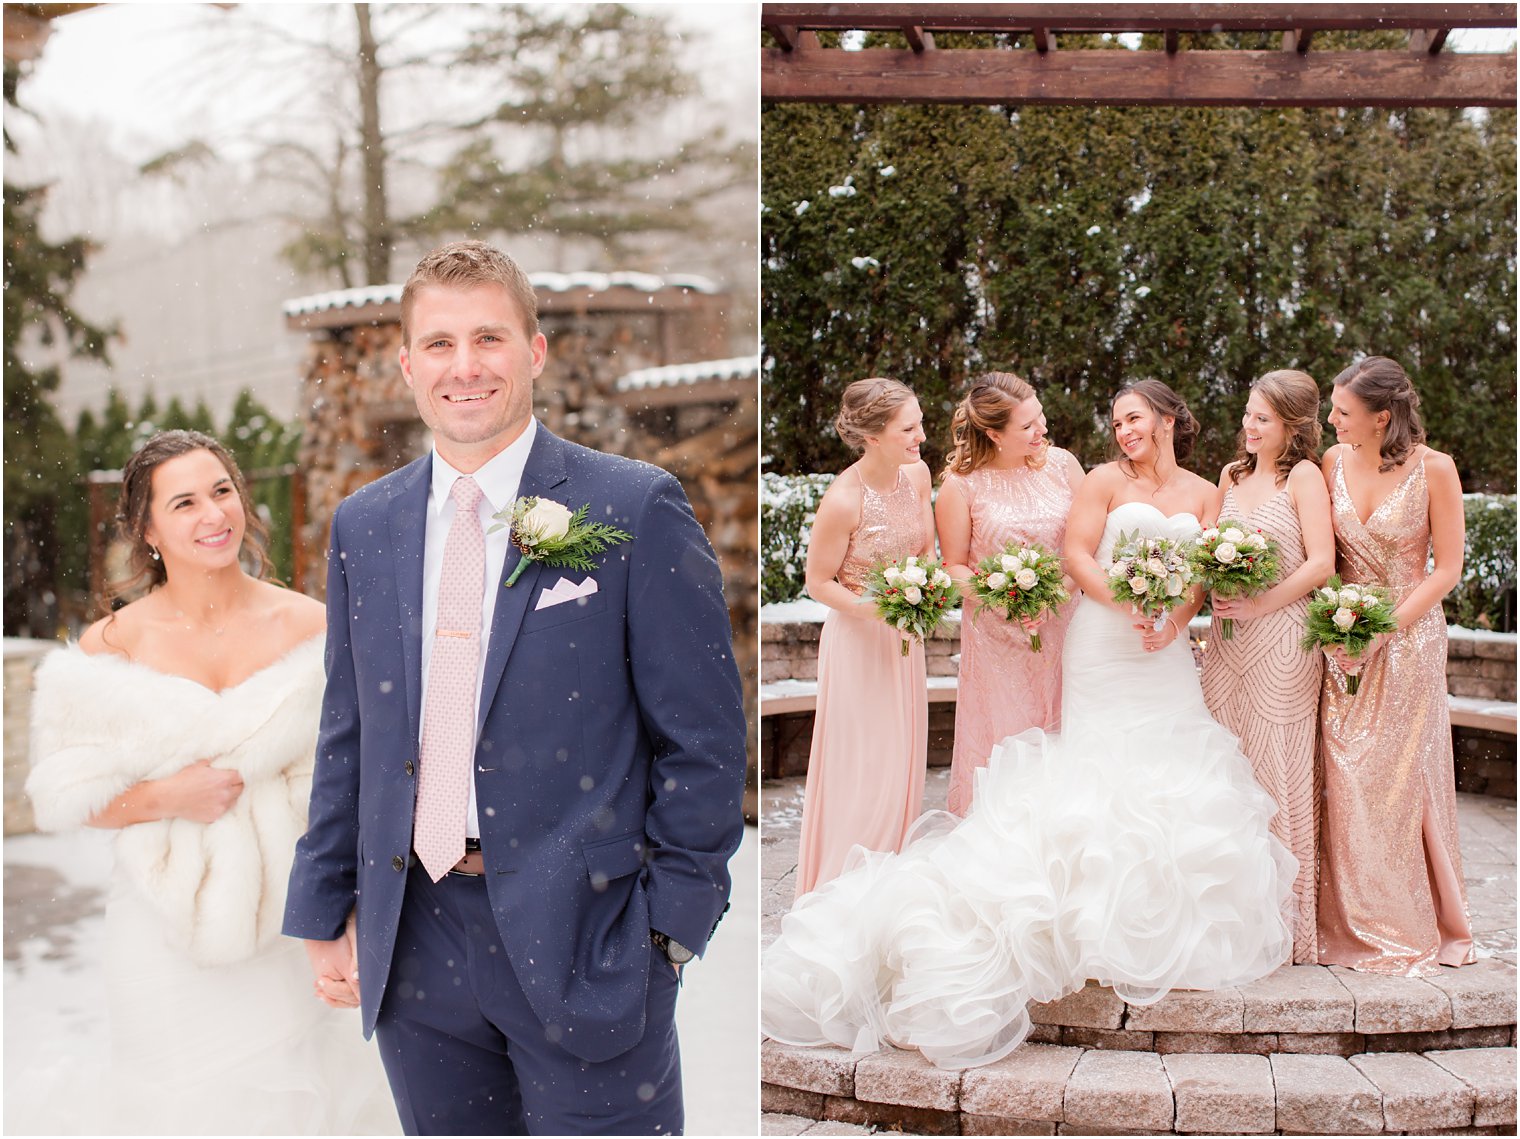 Bridesmaids wearing rose gold dresses in the snow | Stone House at Stirling Ridge in Warren, NJ